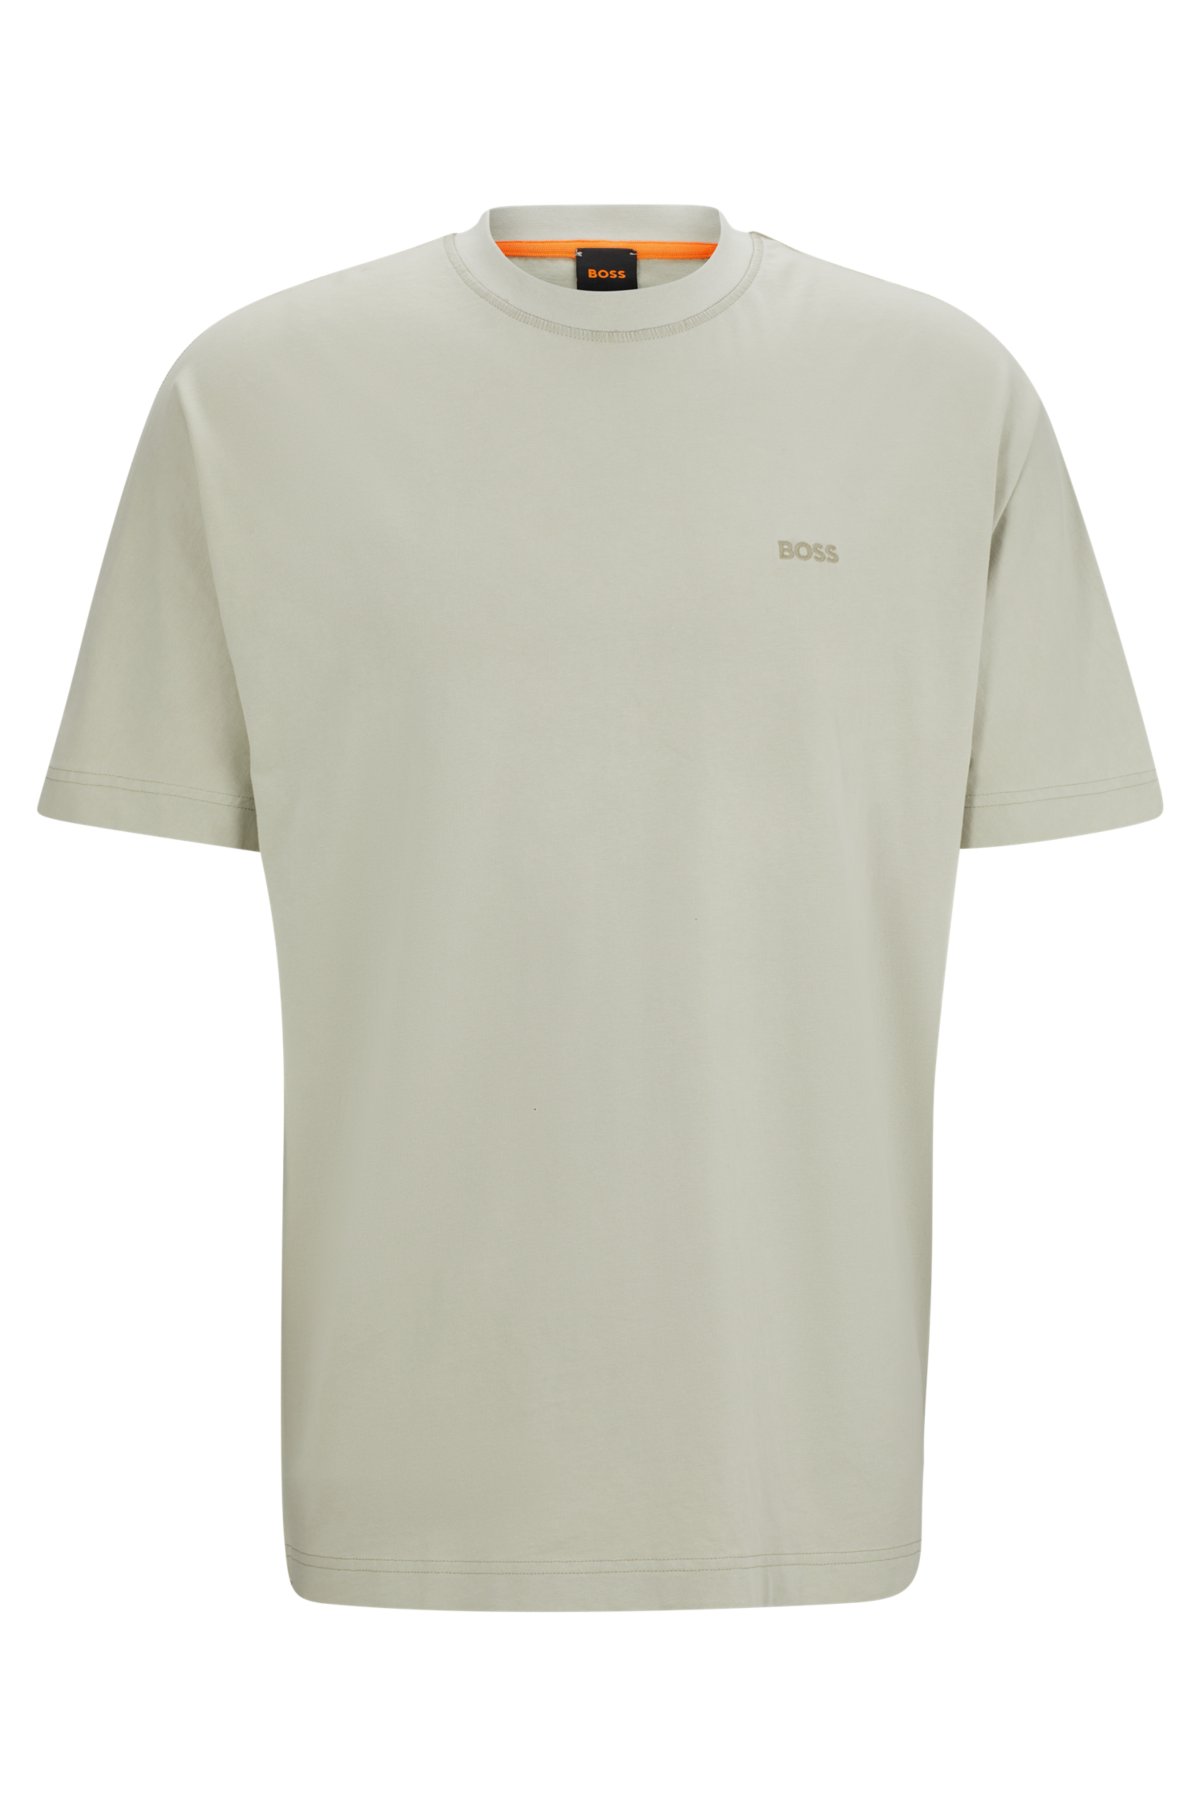 Relaxed-fit T-shirt in pure cotton with embroidered logo, Light Beige